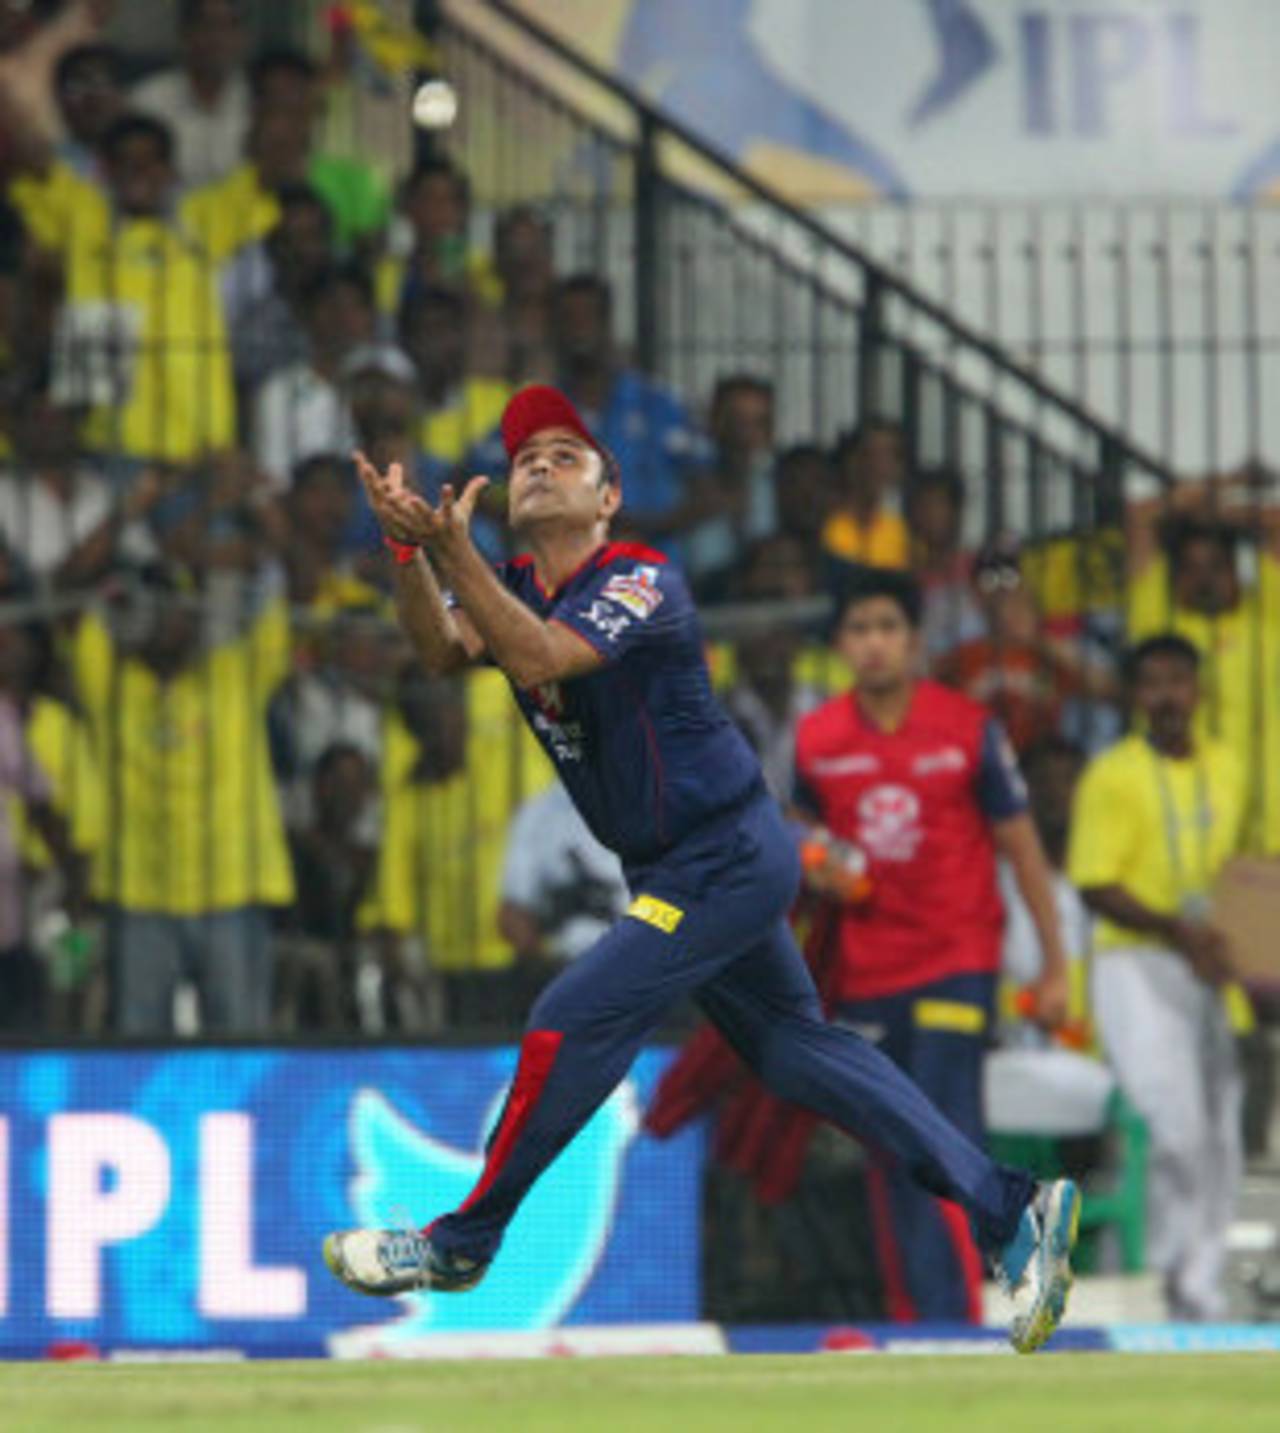 Virender Sehwag gets under a catch to dismiss Michael Hussey, Chennai Super Kings v Delhi Daredevils, IPL 2013, Chennai, May 14, 2013
